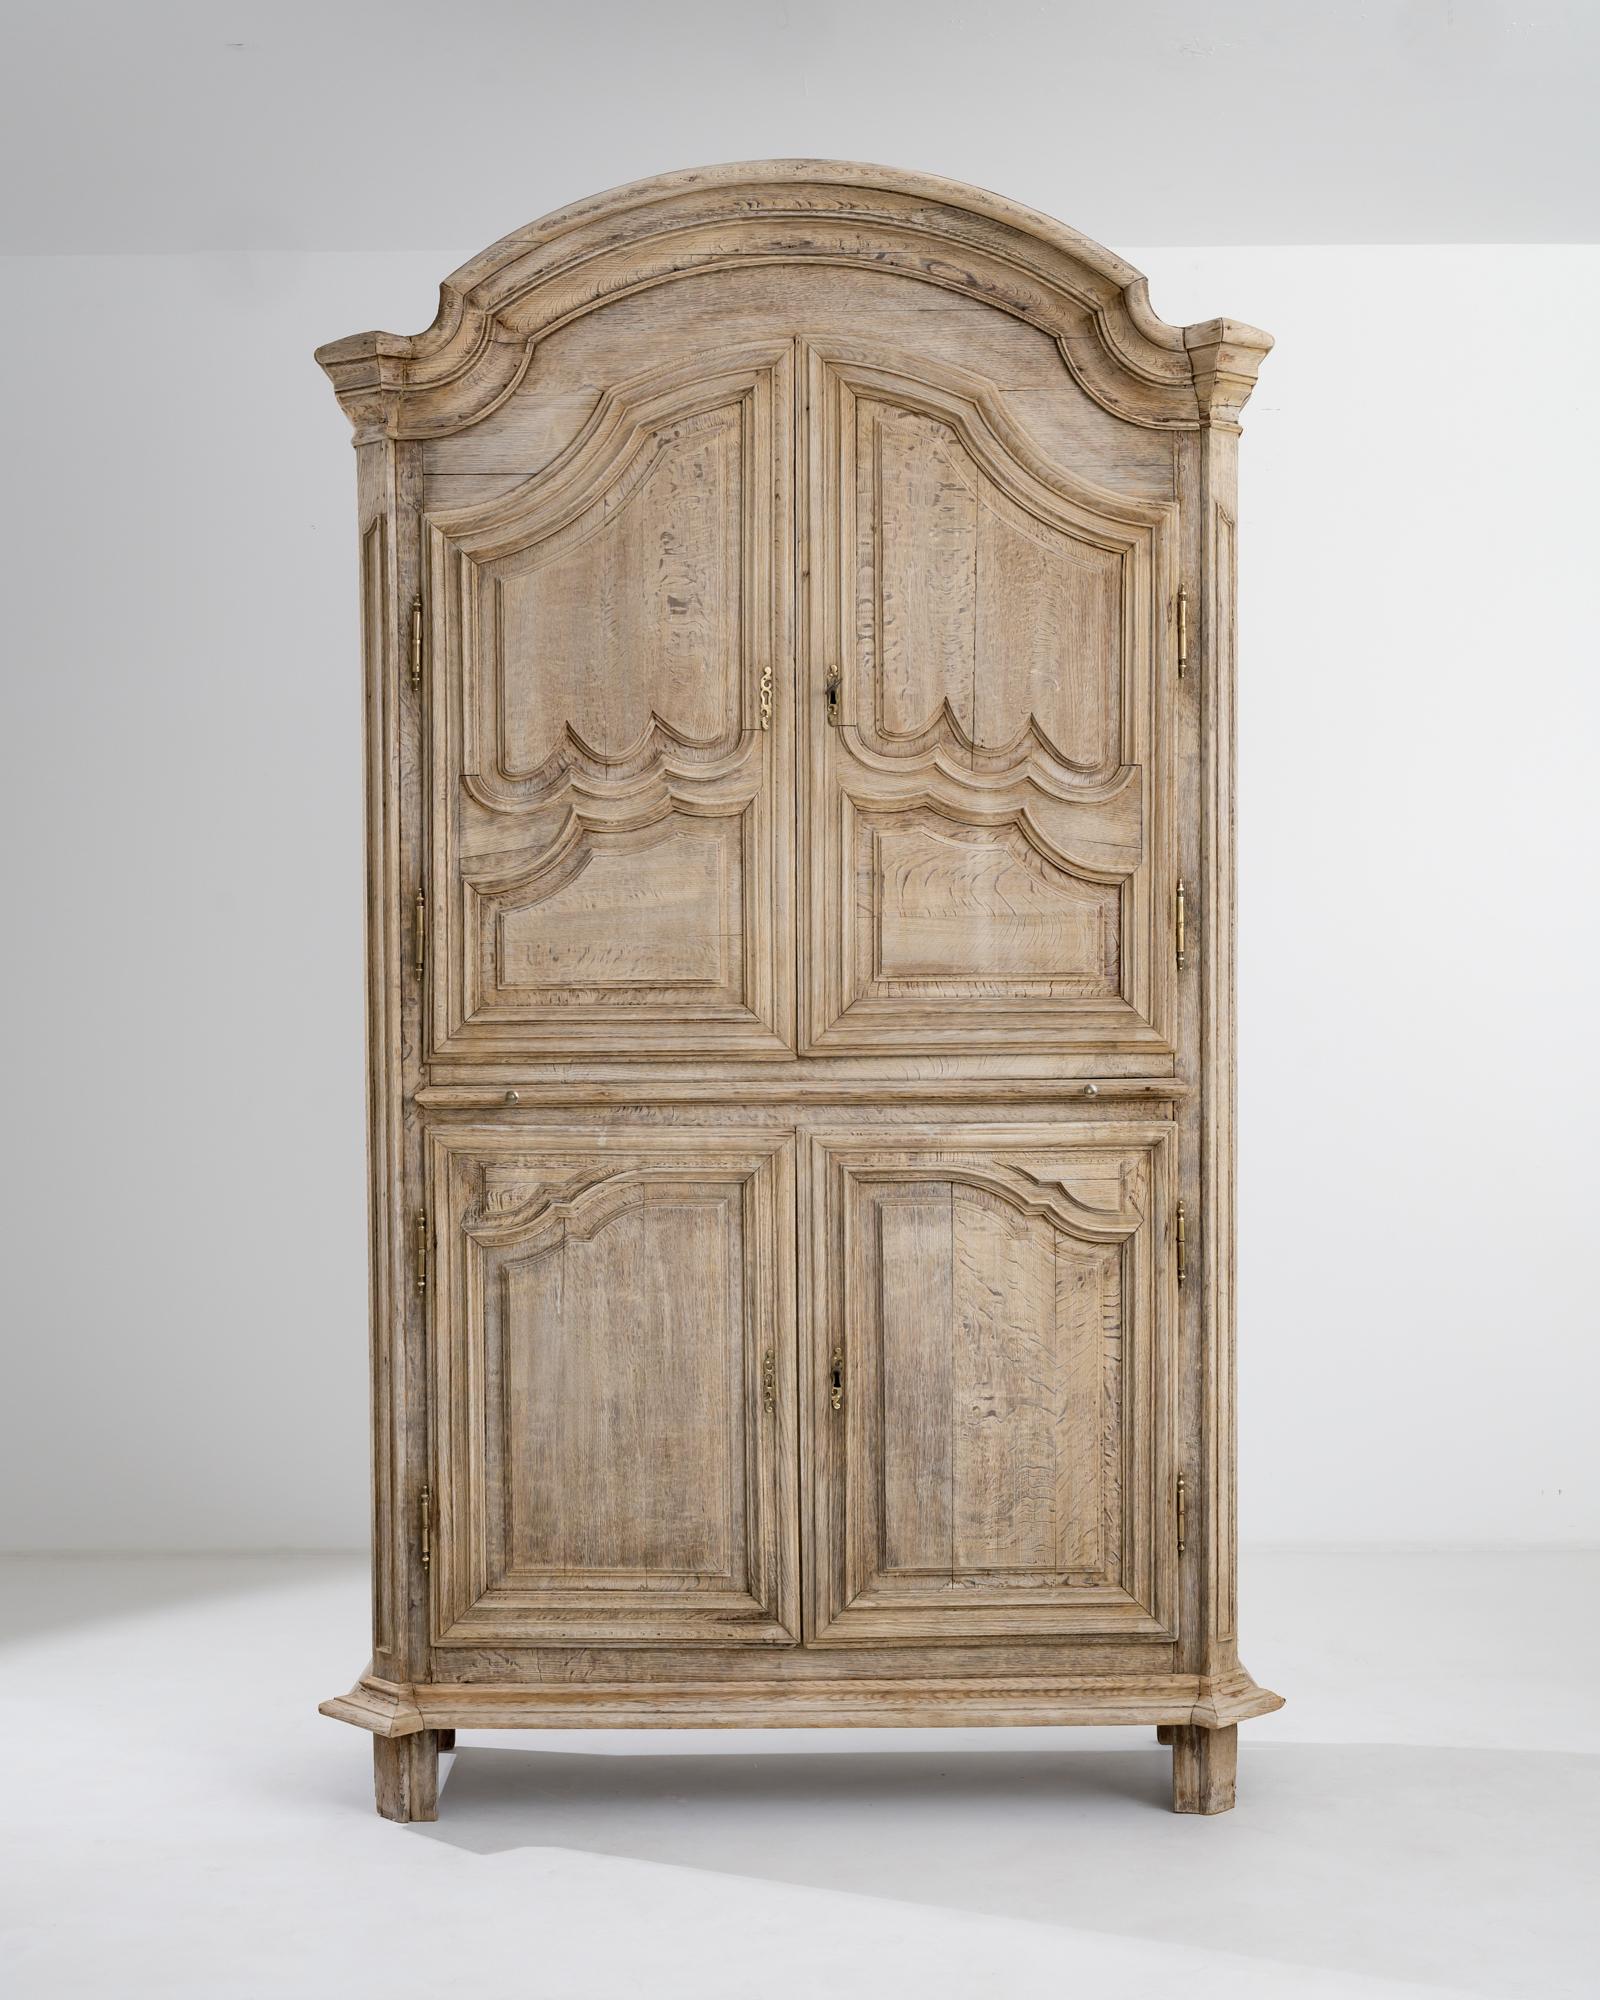 This antique oak cabinet combines Baroque theatricality with the simple beauty of Provincial craftsmanship. Built in France circa 1800, the dramatic arch of the cornice provides a striking frame for the beautifully paneled doors. The contours of the